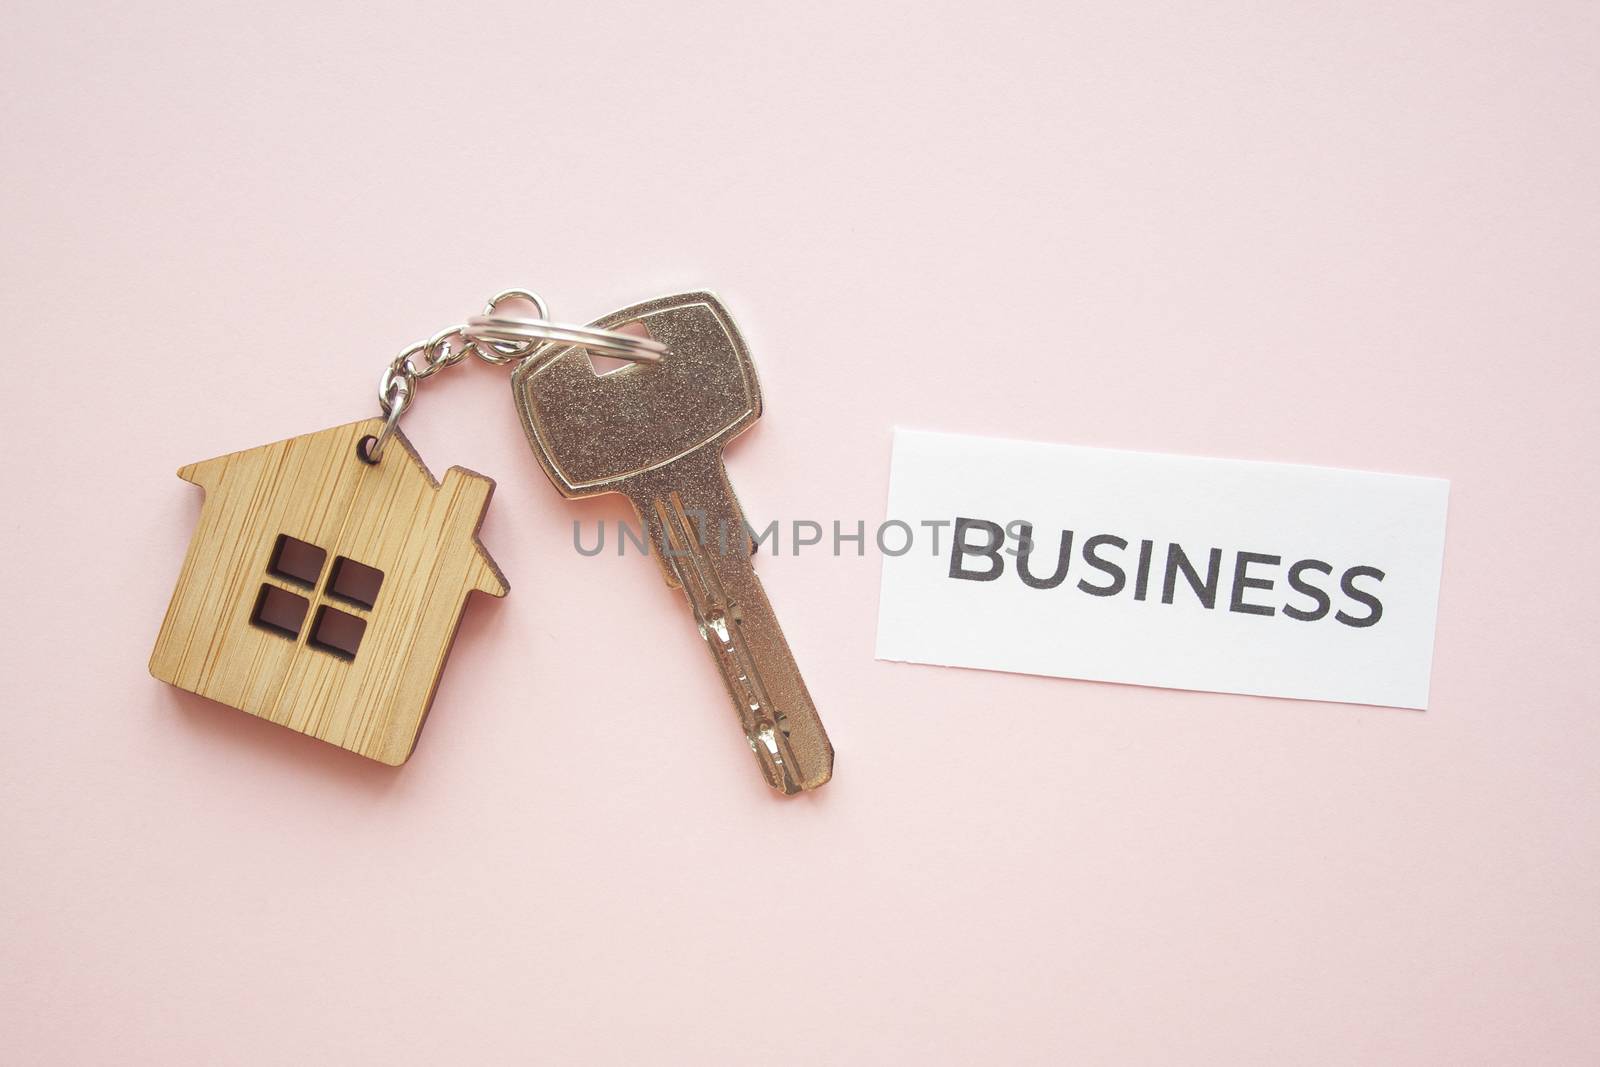 Wooden house toy and silver key on bright pink background with phrase quote business. Mortgage, house buy sell, investment, rent, realtor concept